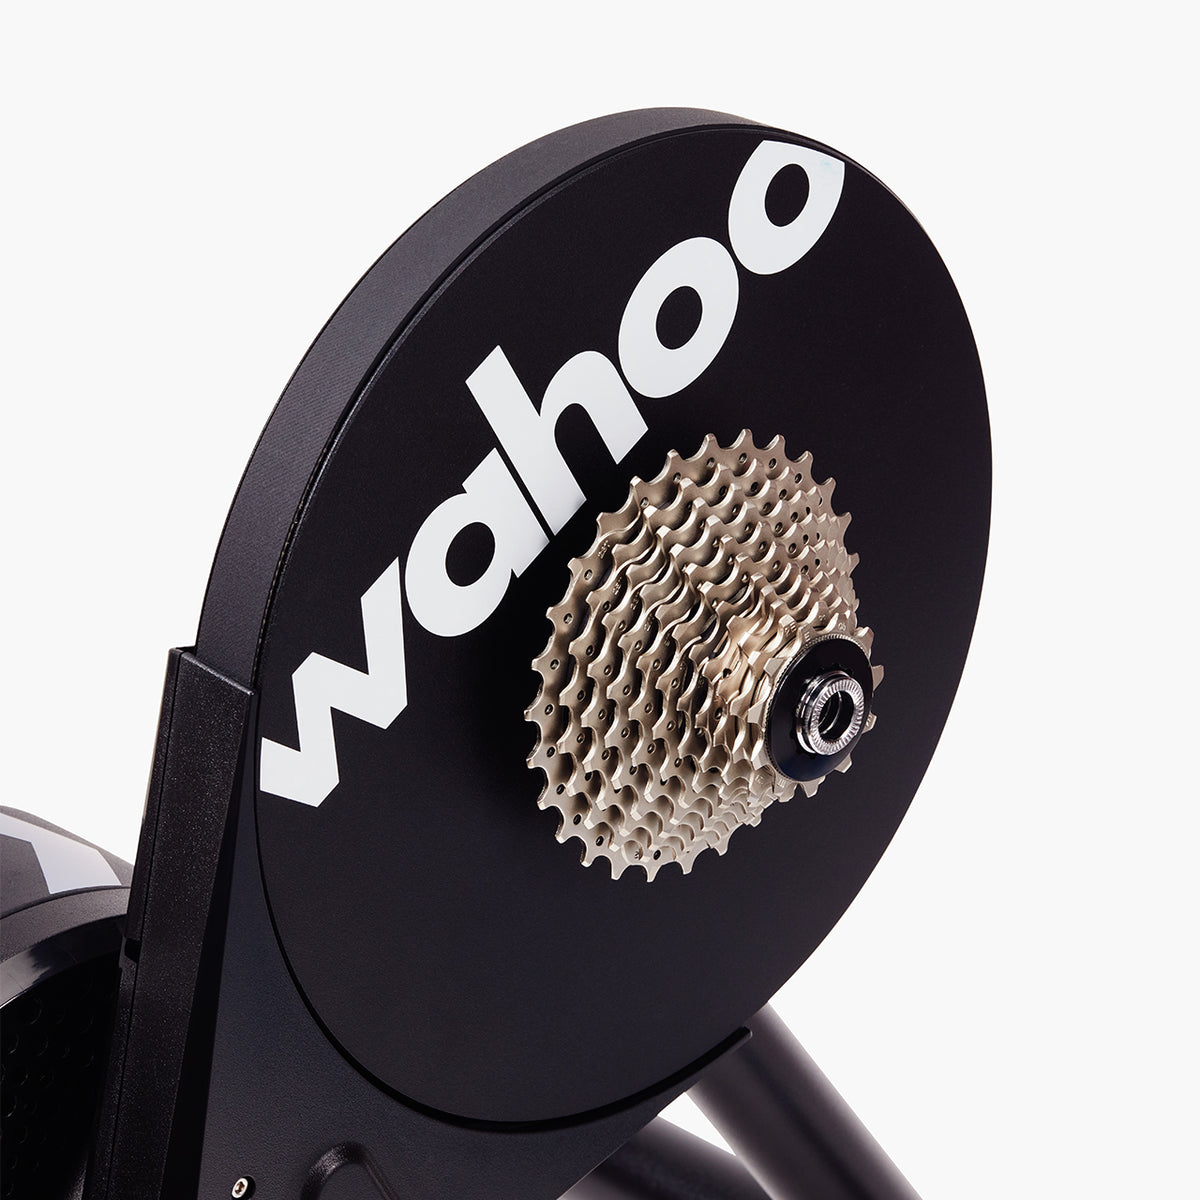 Wahoo KICKR CORE with 11-speed cassette